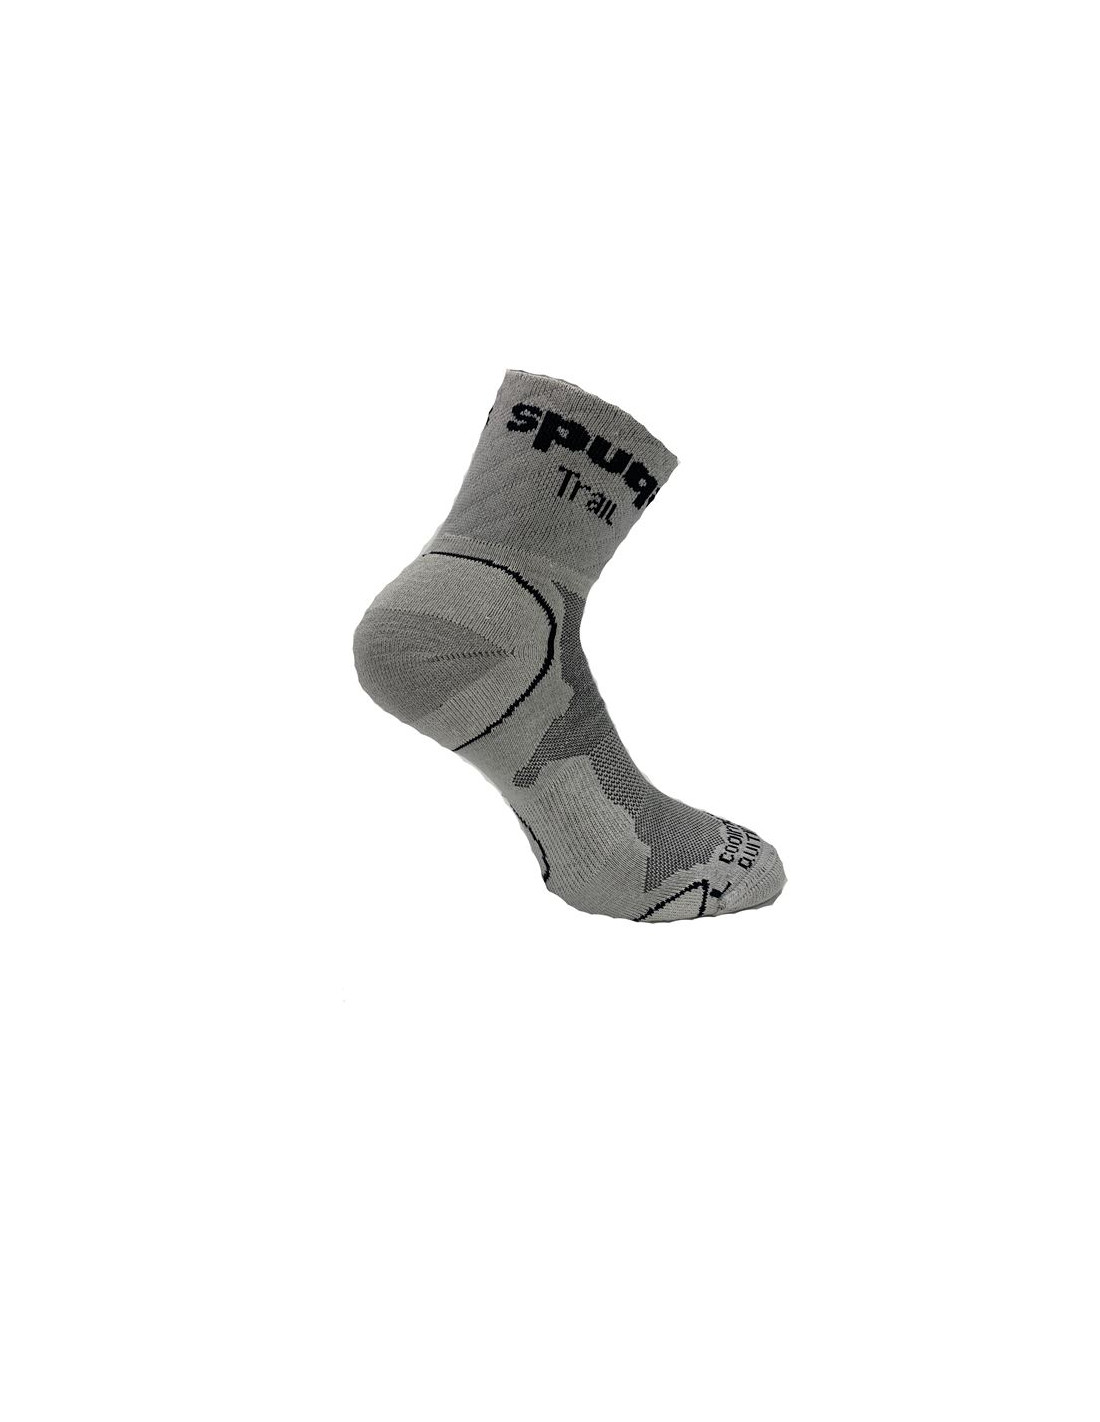 Calcetines spuqs coolmax protect gris/negro